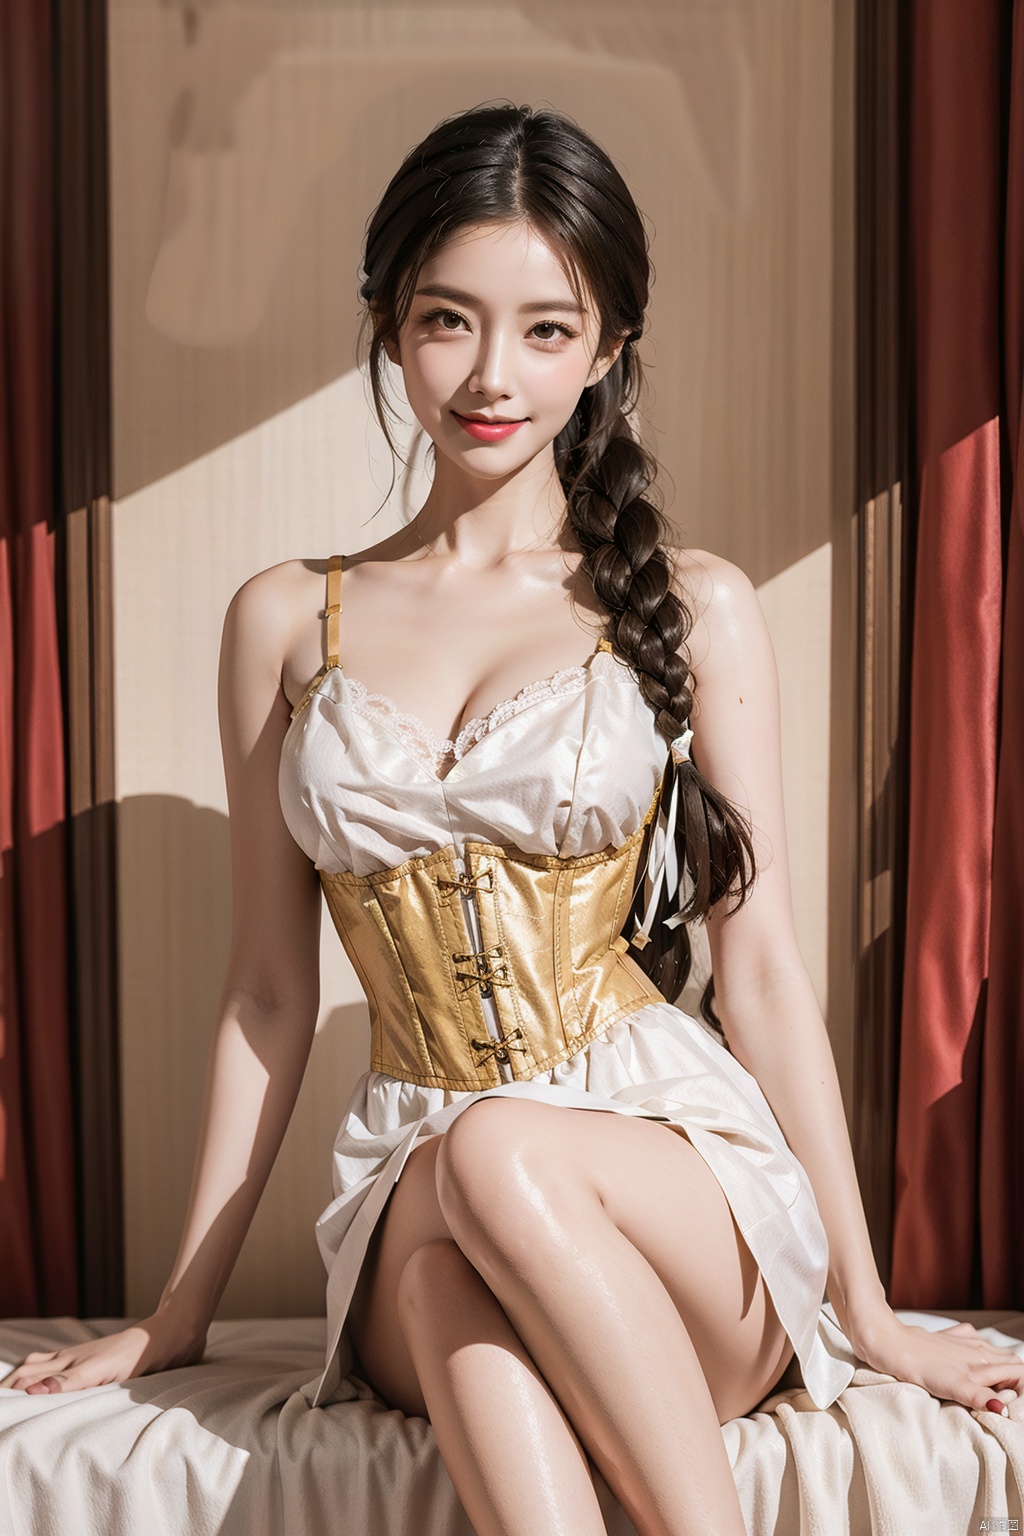  National style, chest wipe, horse skirt, bare shoulder, collarbone, collarbone chain, white lace corset top, lower body with horse skirt, exposing legs, bare feet, tall female, wide shoulder narrow waist, white skin, delicate face, shaking a fan in the hand, smiling expression, a slight smile is very beautiful, side head, landscape background, Chinese Niang, senior sense, real beauty, long legs and big breasts, Braids in one side scorpion braid, ((poakl))